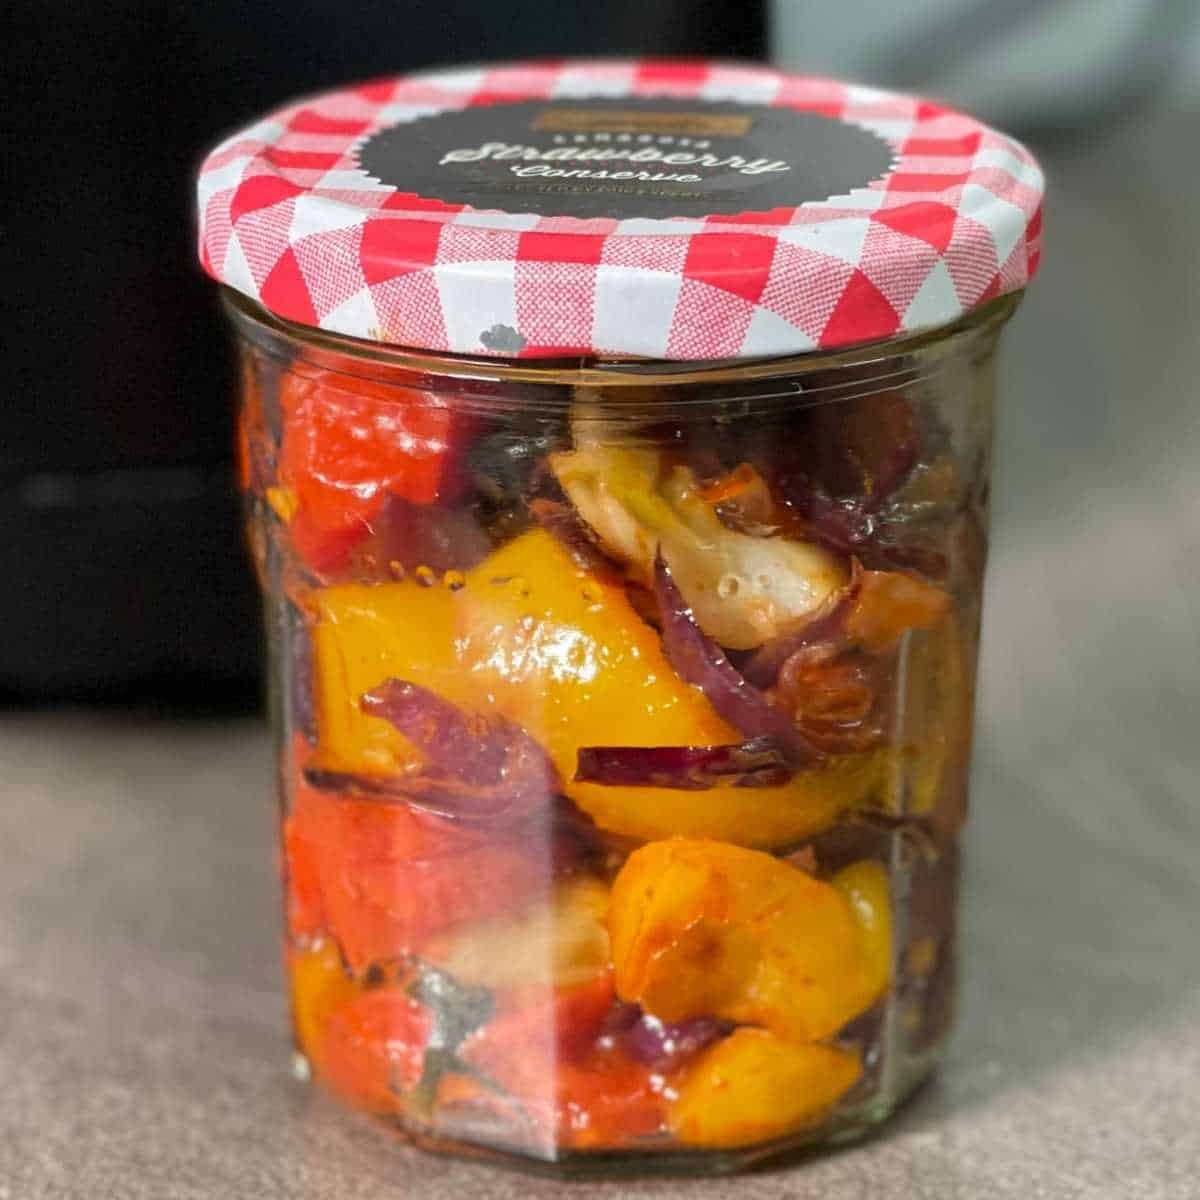 Air Fryer Roasted Vegetables stored in a glass jam jar with red and white gingham lid on a brown surface with a black air fryer in the background